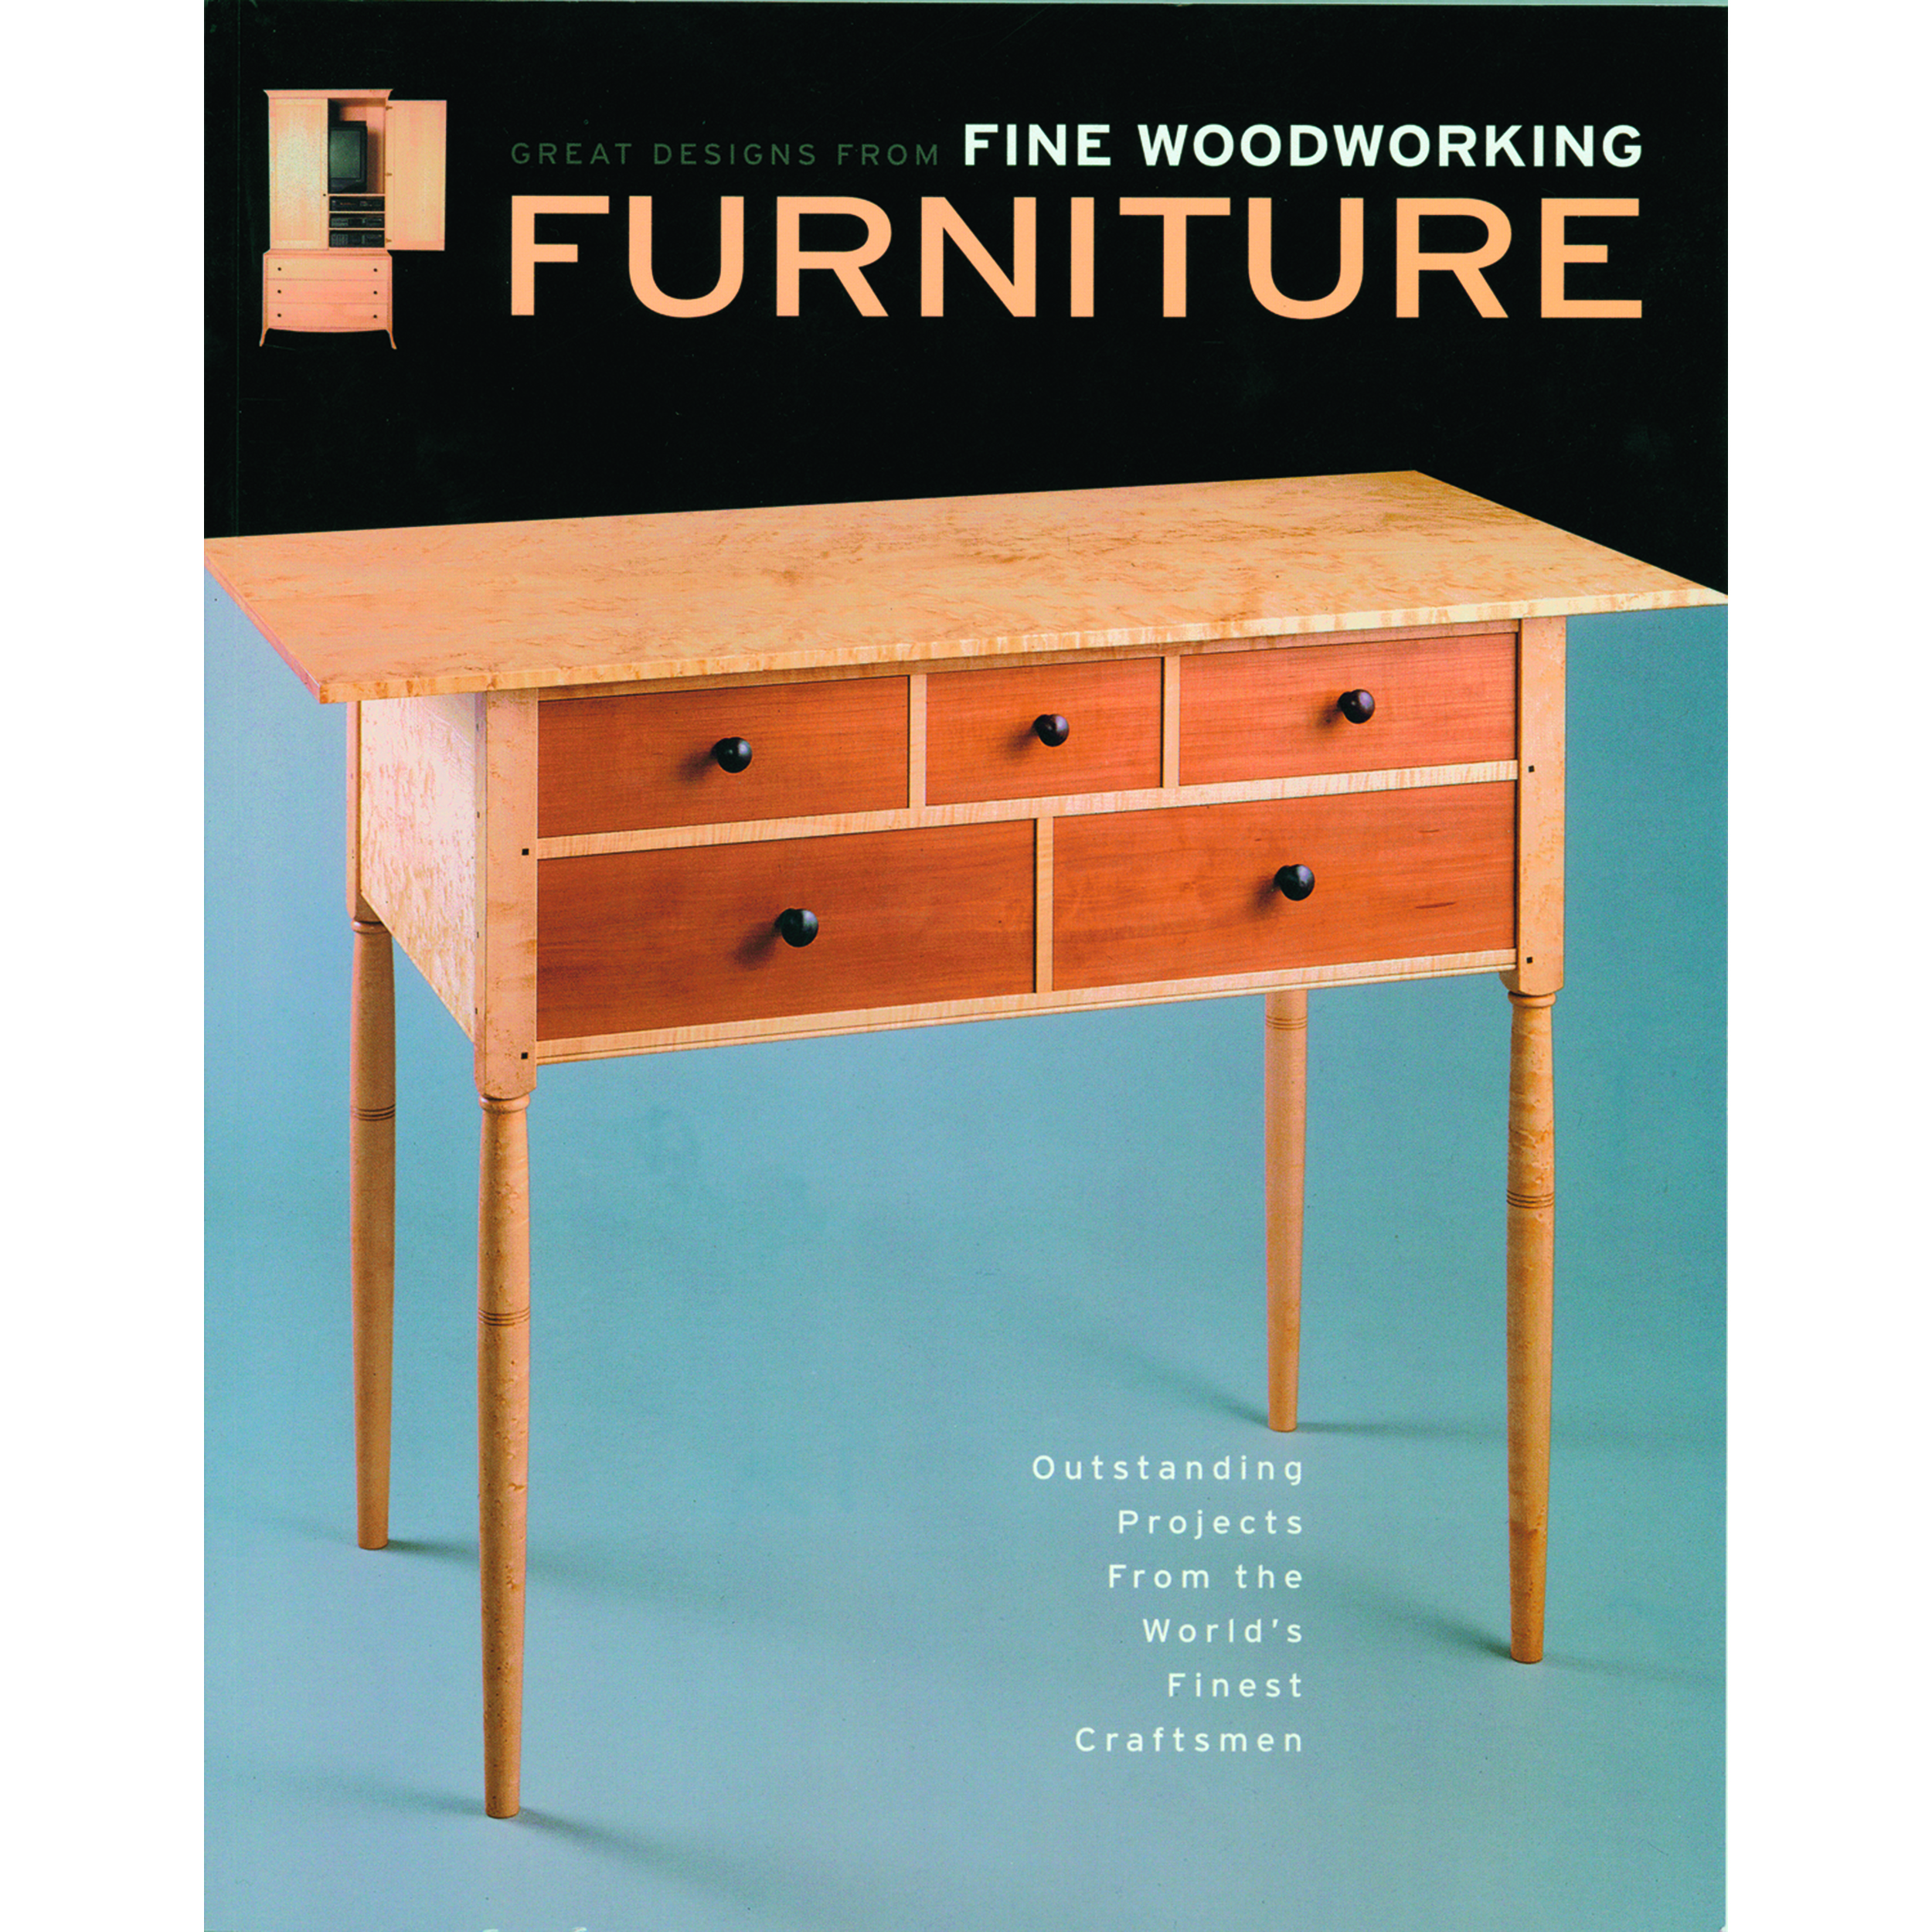 Furniture: Great Designs From Fine Woodworking